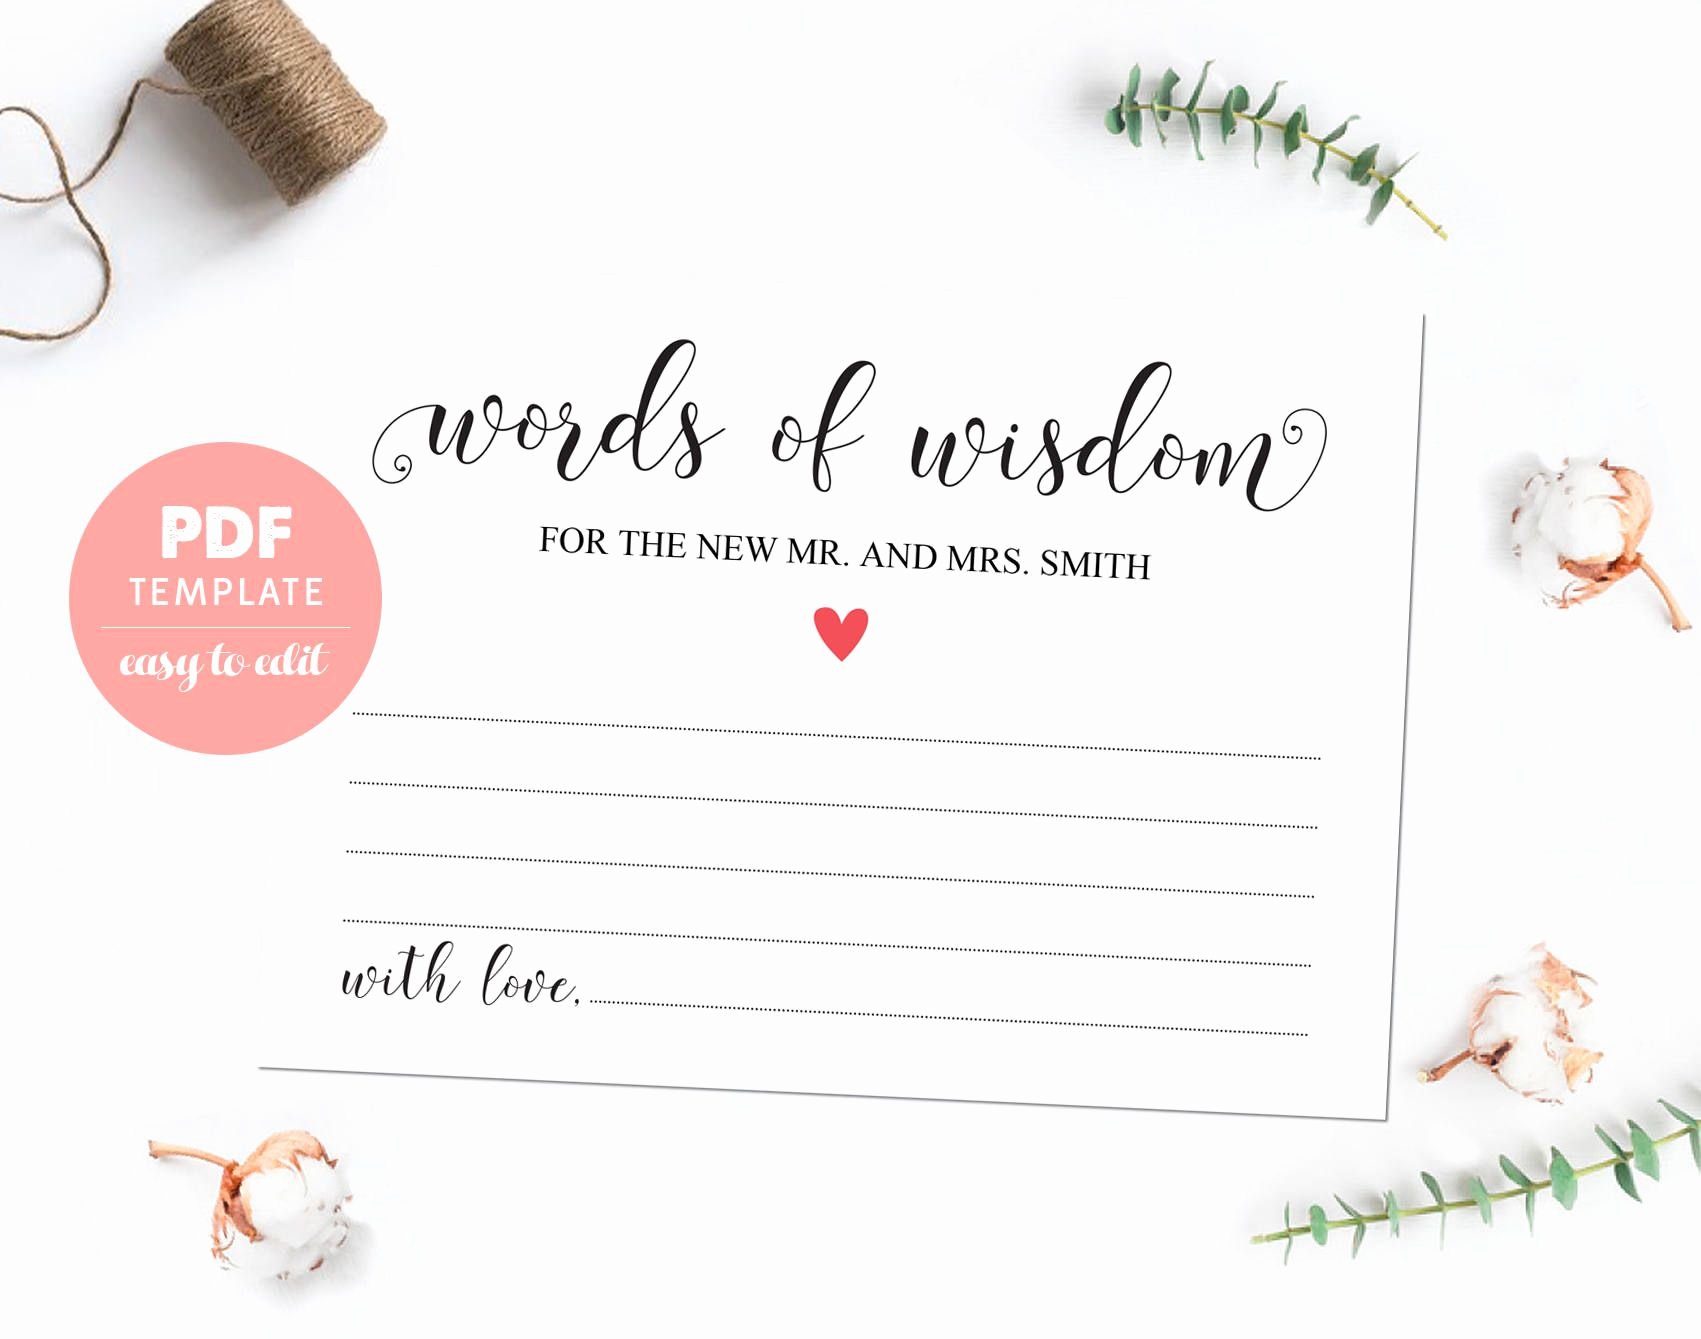 Bridesmaid Card Template Inspirational Wedding Wishes Pdf Template Card Words Of Wisdom Card